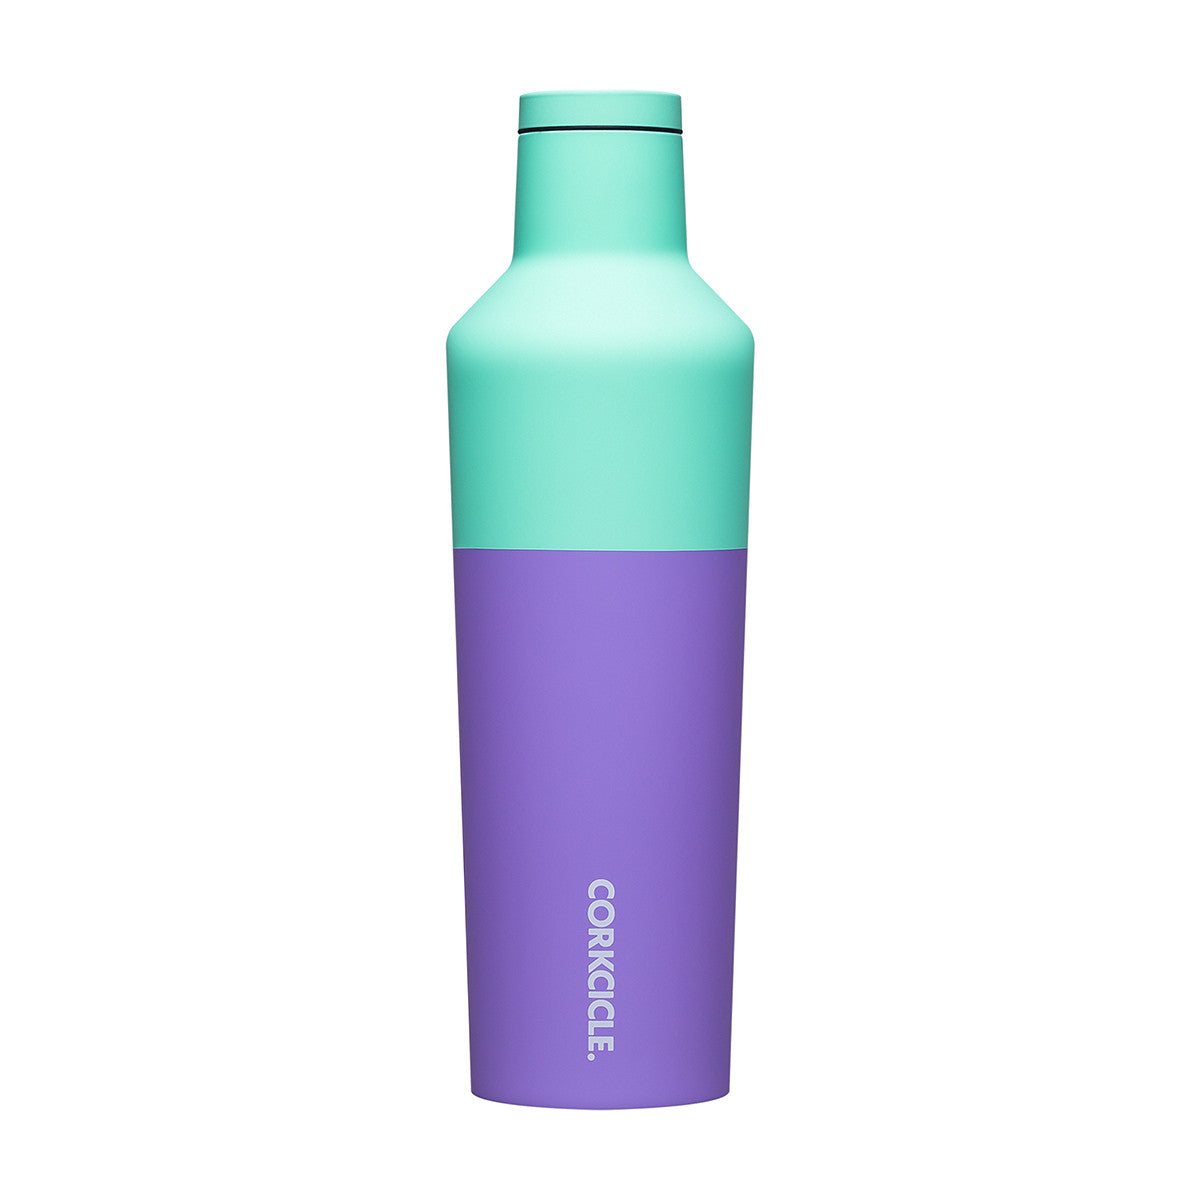 Corkcicle Colour Block Canteen 475ml - Mint Berry Insulated Stainless Steel Drink Bottle